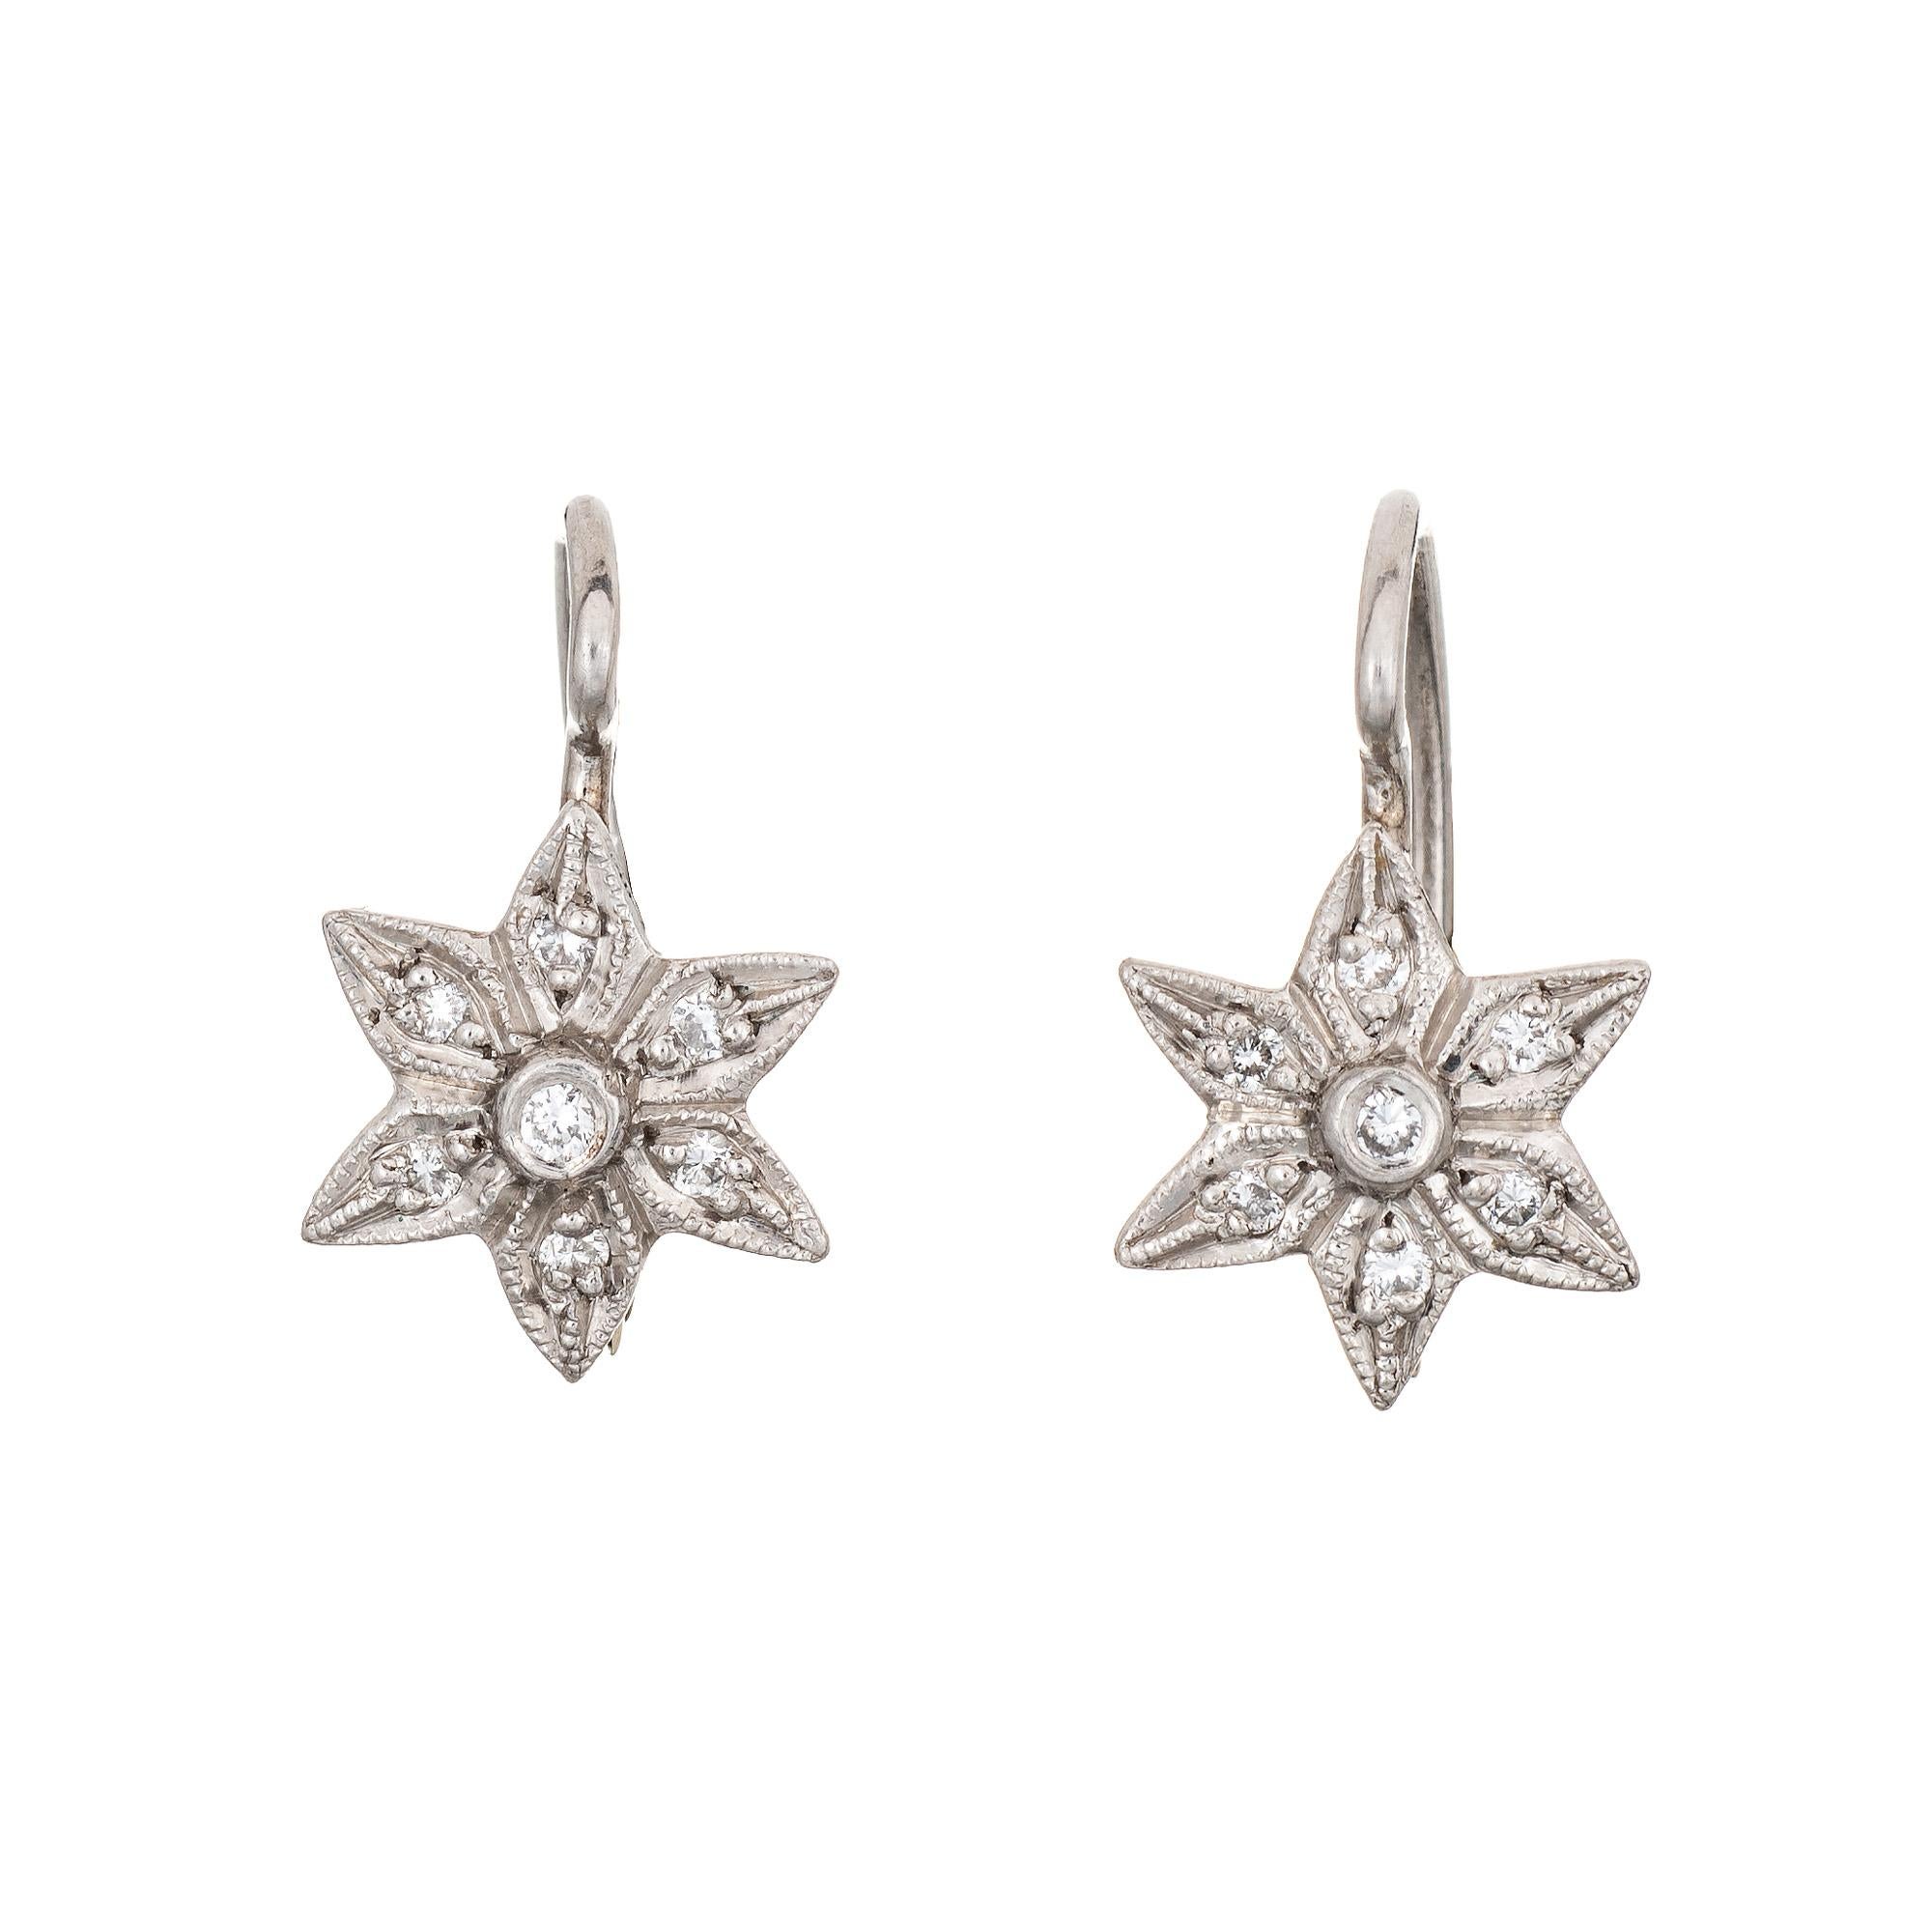 Contemporary Cathy Waterman Diamond Star Earrings Platinum Estate Fine Signed Jewelry For Sale